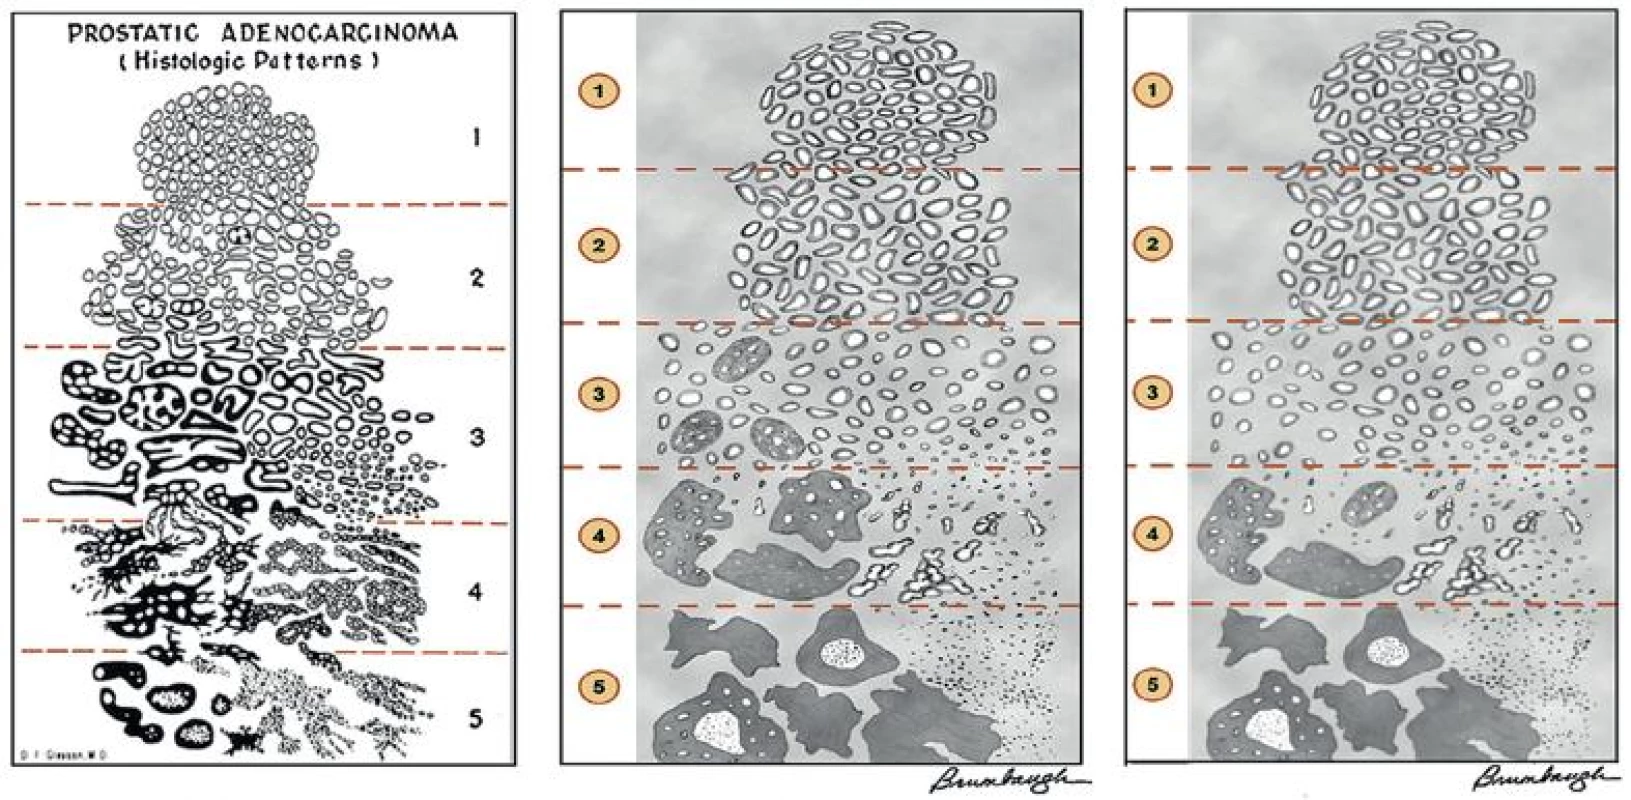 Gleason grading system. The original system (A) and 2005 International Society Urological Pathology (ISUP) modified system (B) differ significantly in the definition of grades 3 and 4. Poorly formed glands and majority of cribriform glands are graded as grade 4 and only well formed discrete glands are graded as grade 3 in 2005 ISUP modified system. In the further modification, all cribriform glands are considered grade 4 (C).